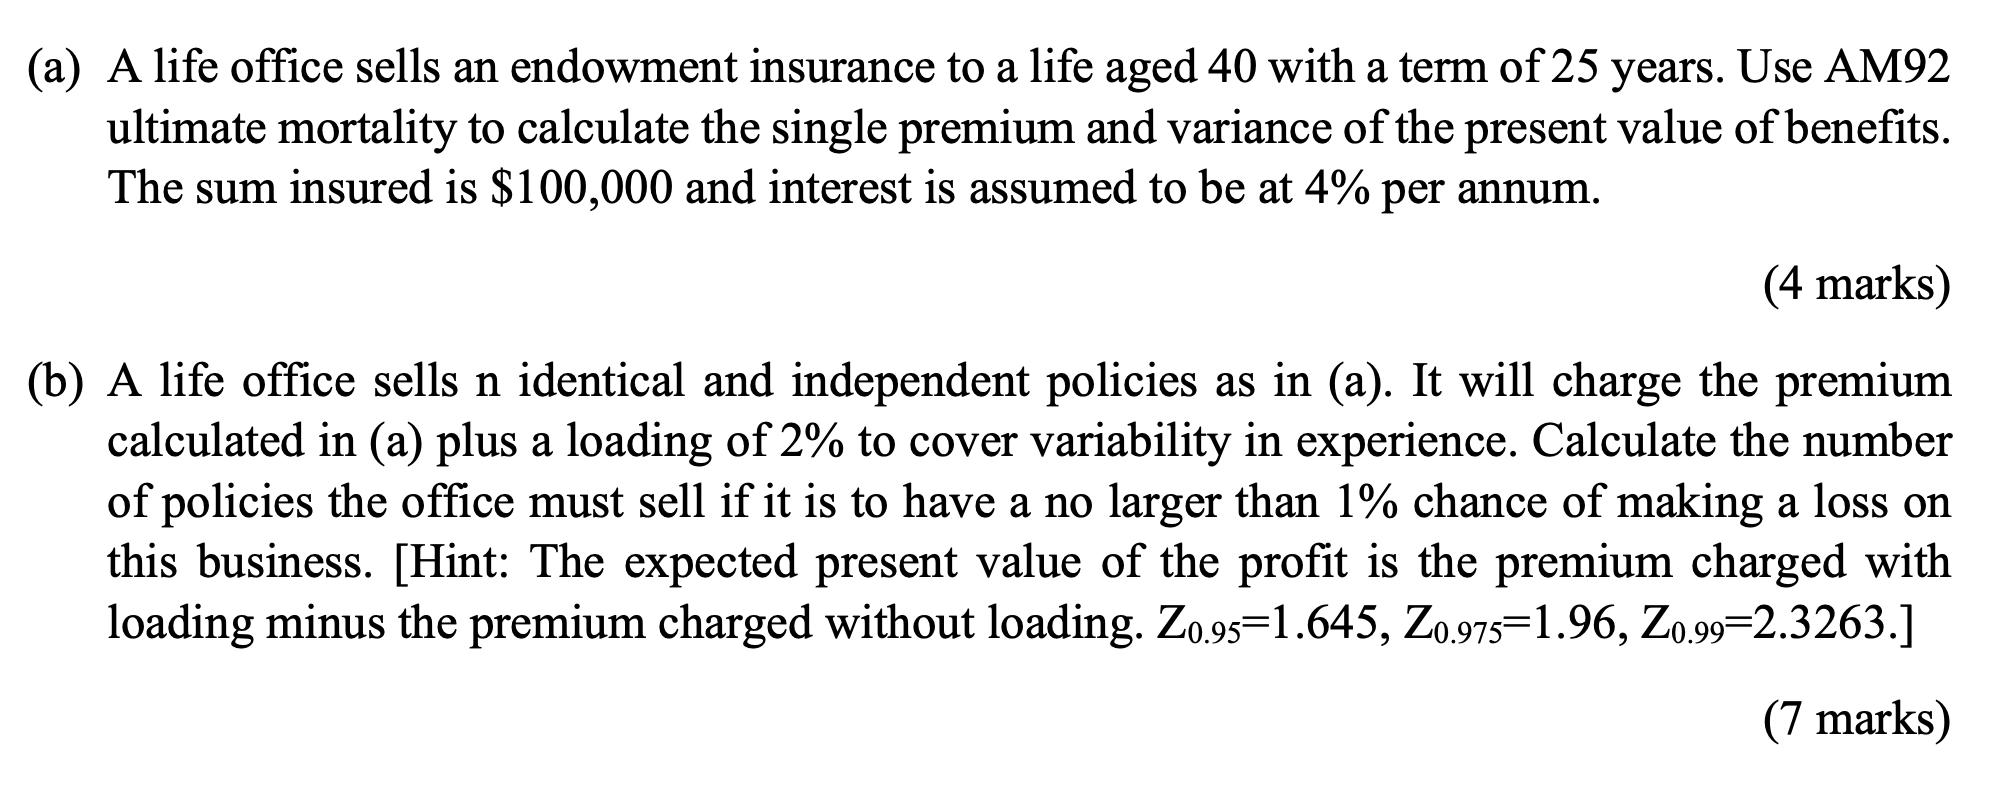 (a) A life office sells an endowment insurance to a life aged 40 with a term of 25 years. Use AM92 ultimate